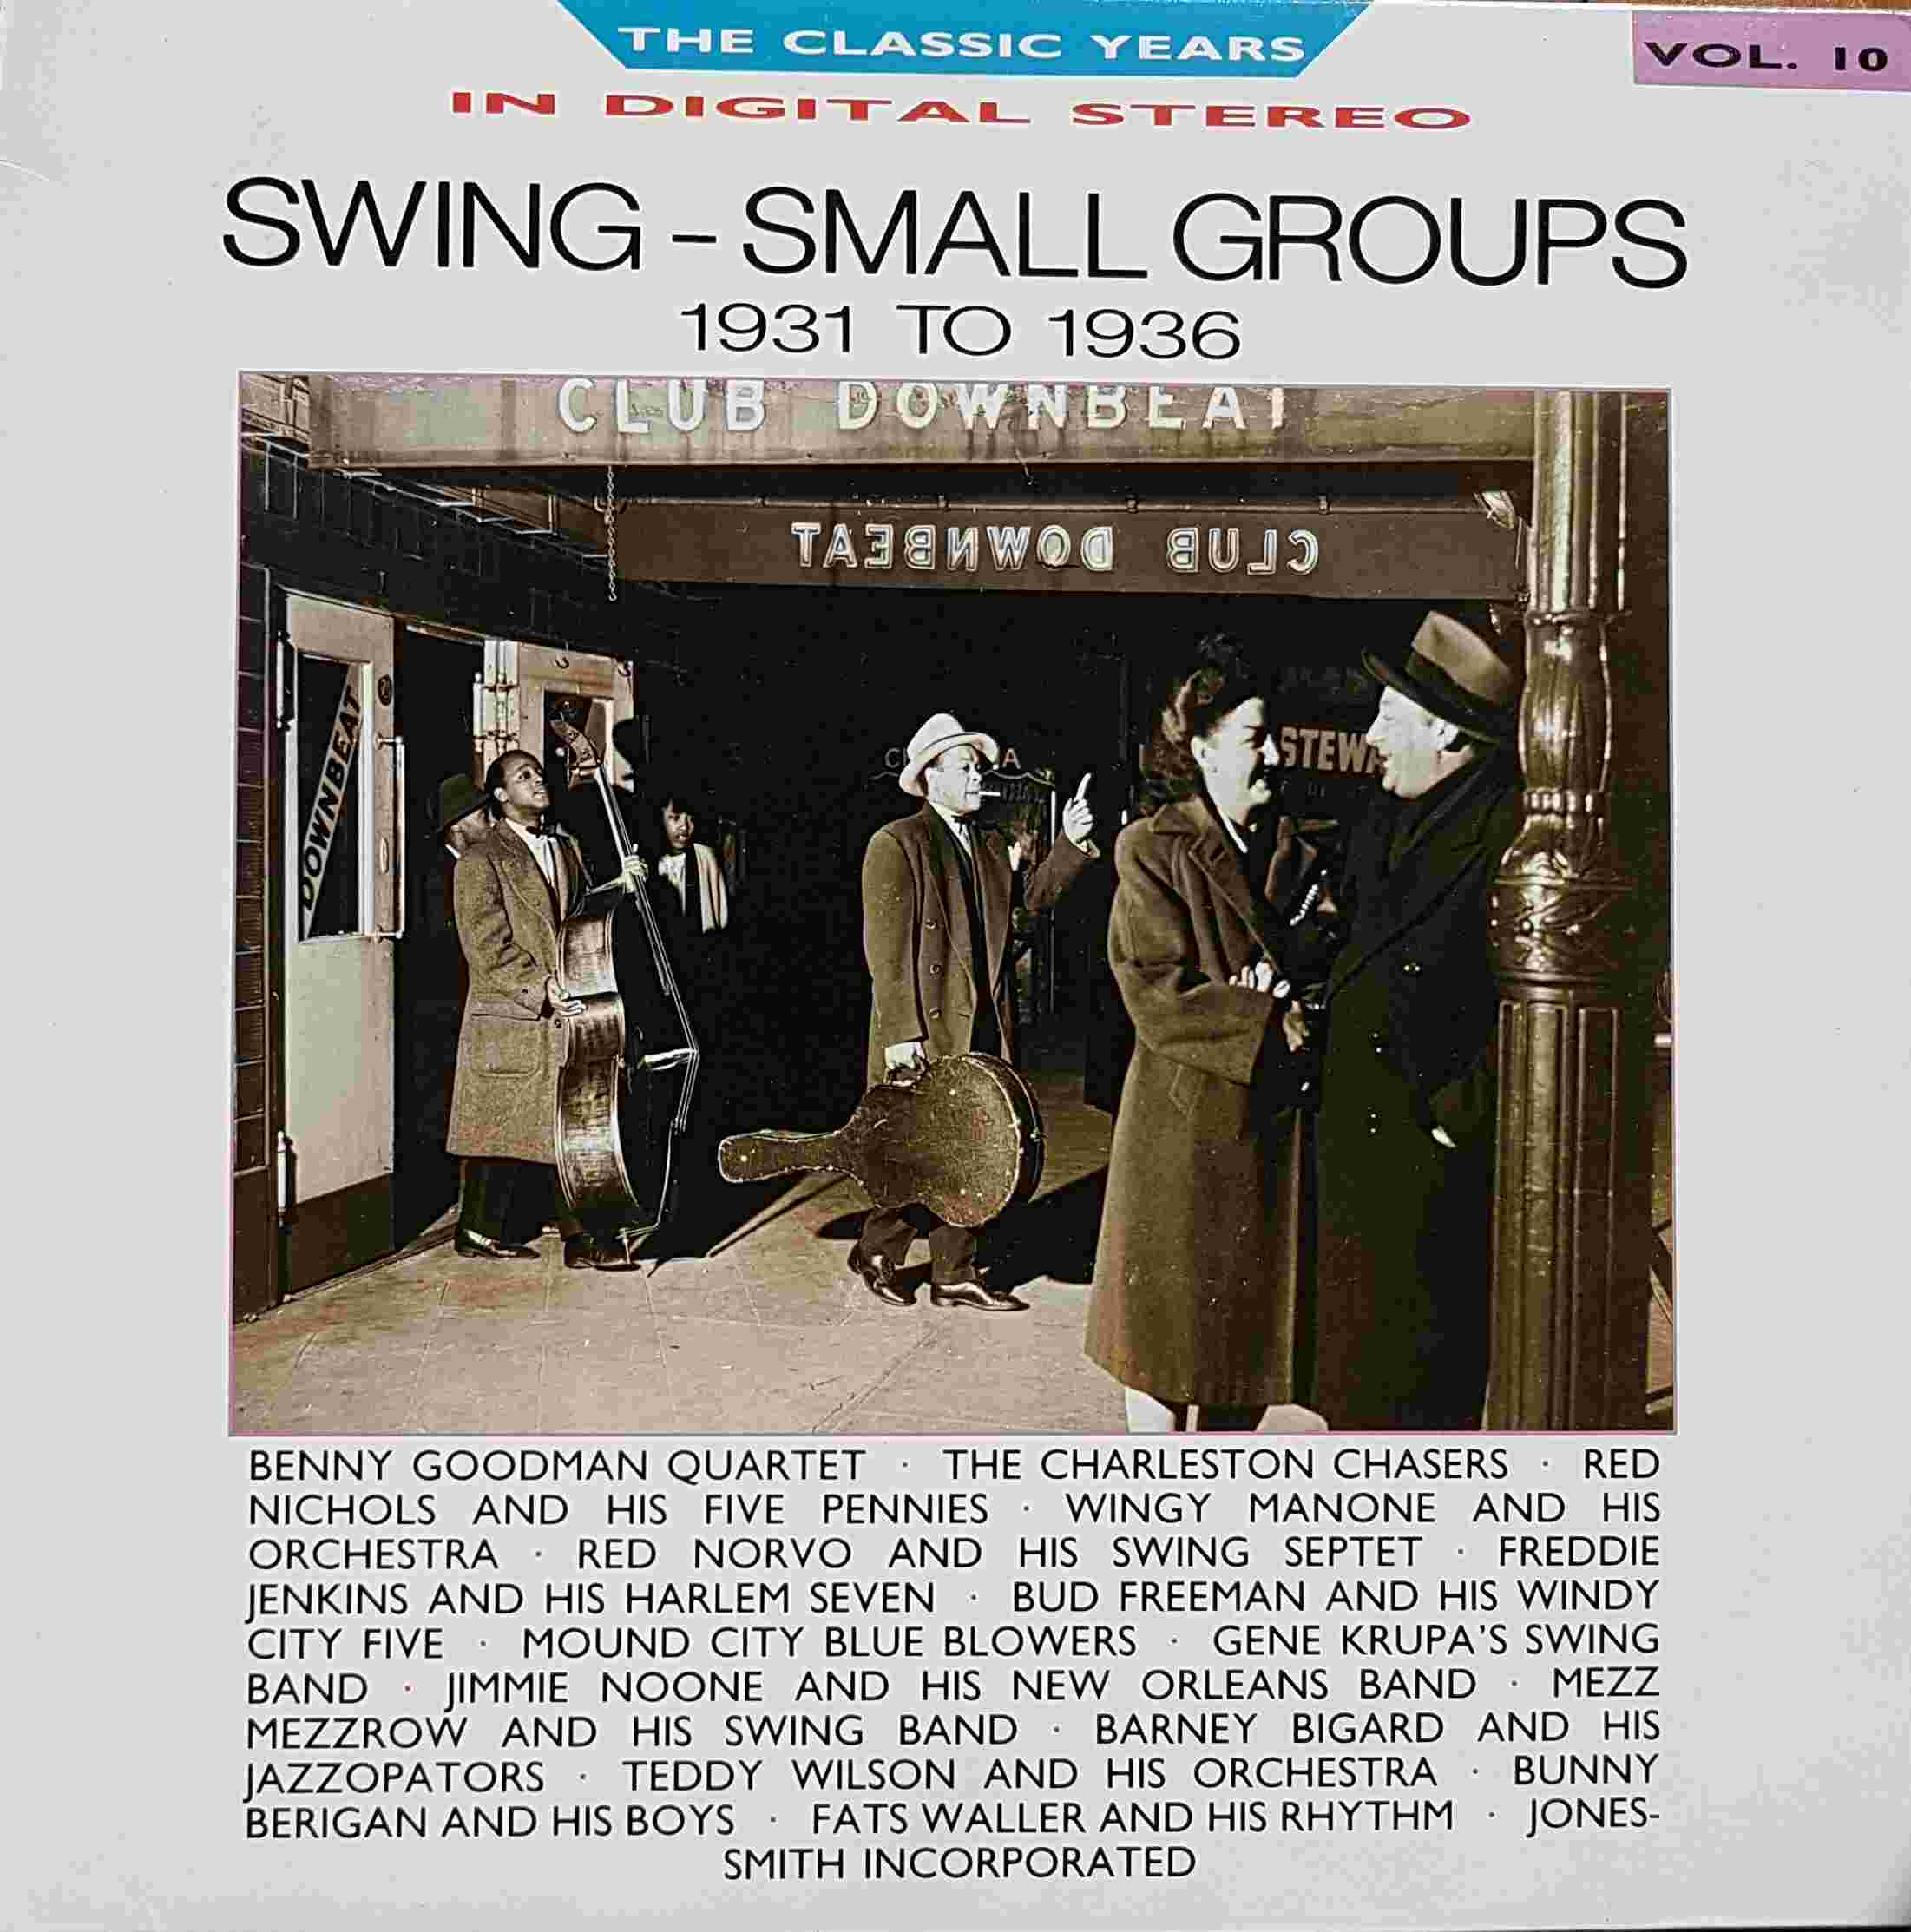 Picture of REB 666 Classic years - Volume 10, Swing small groups by artist Various from the BBC albums - Records and Tapes library